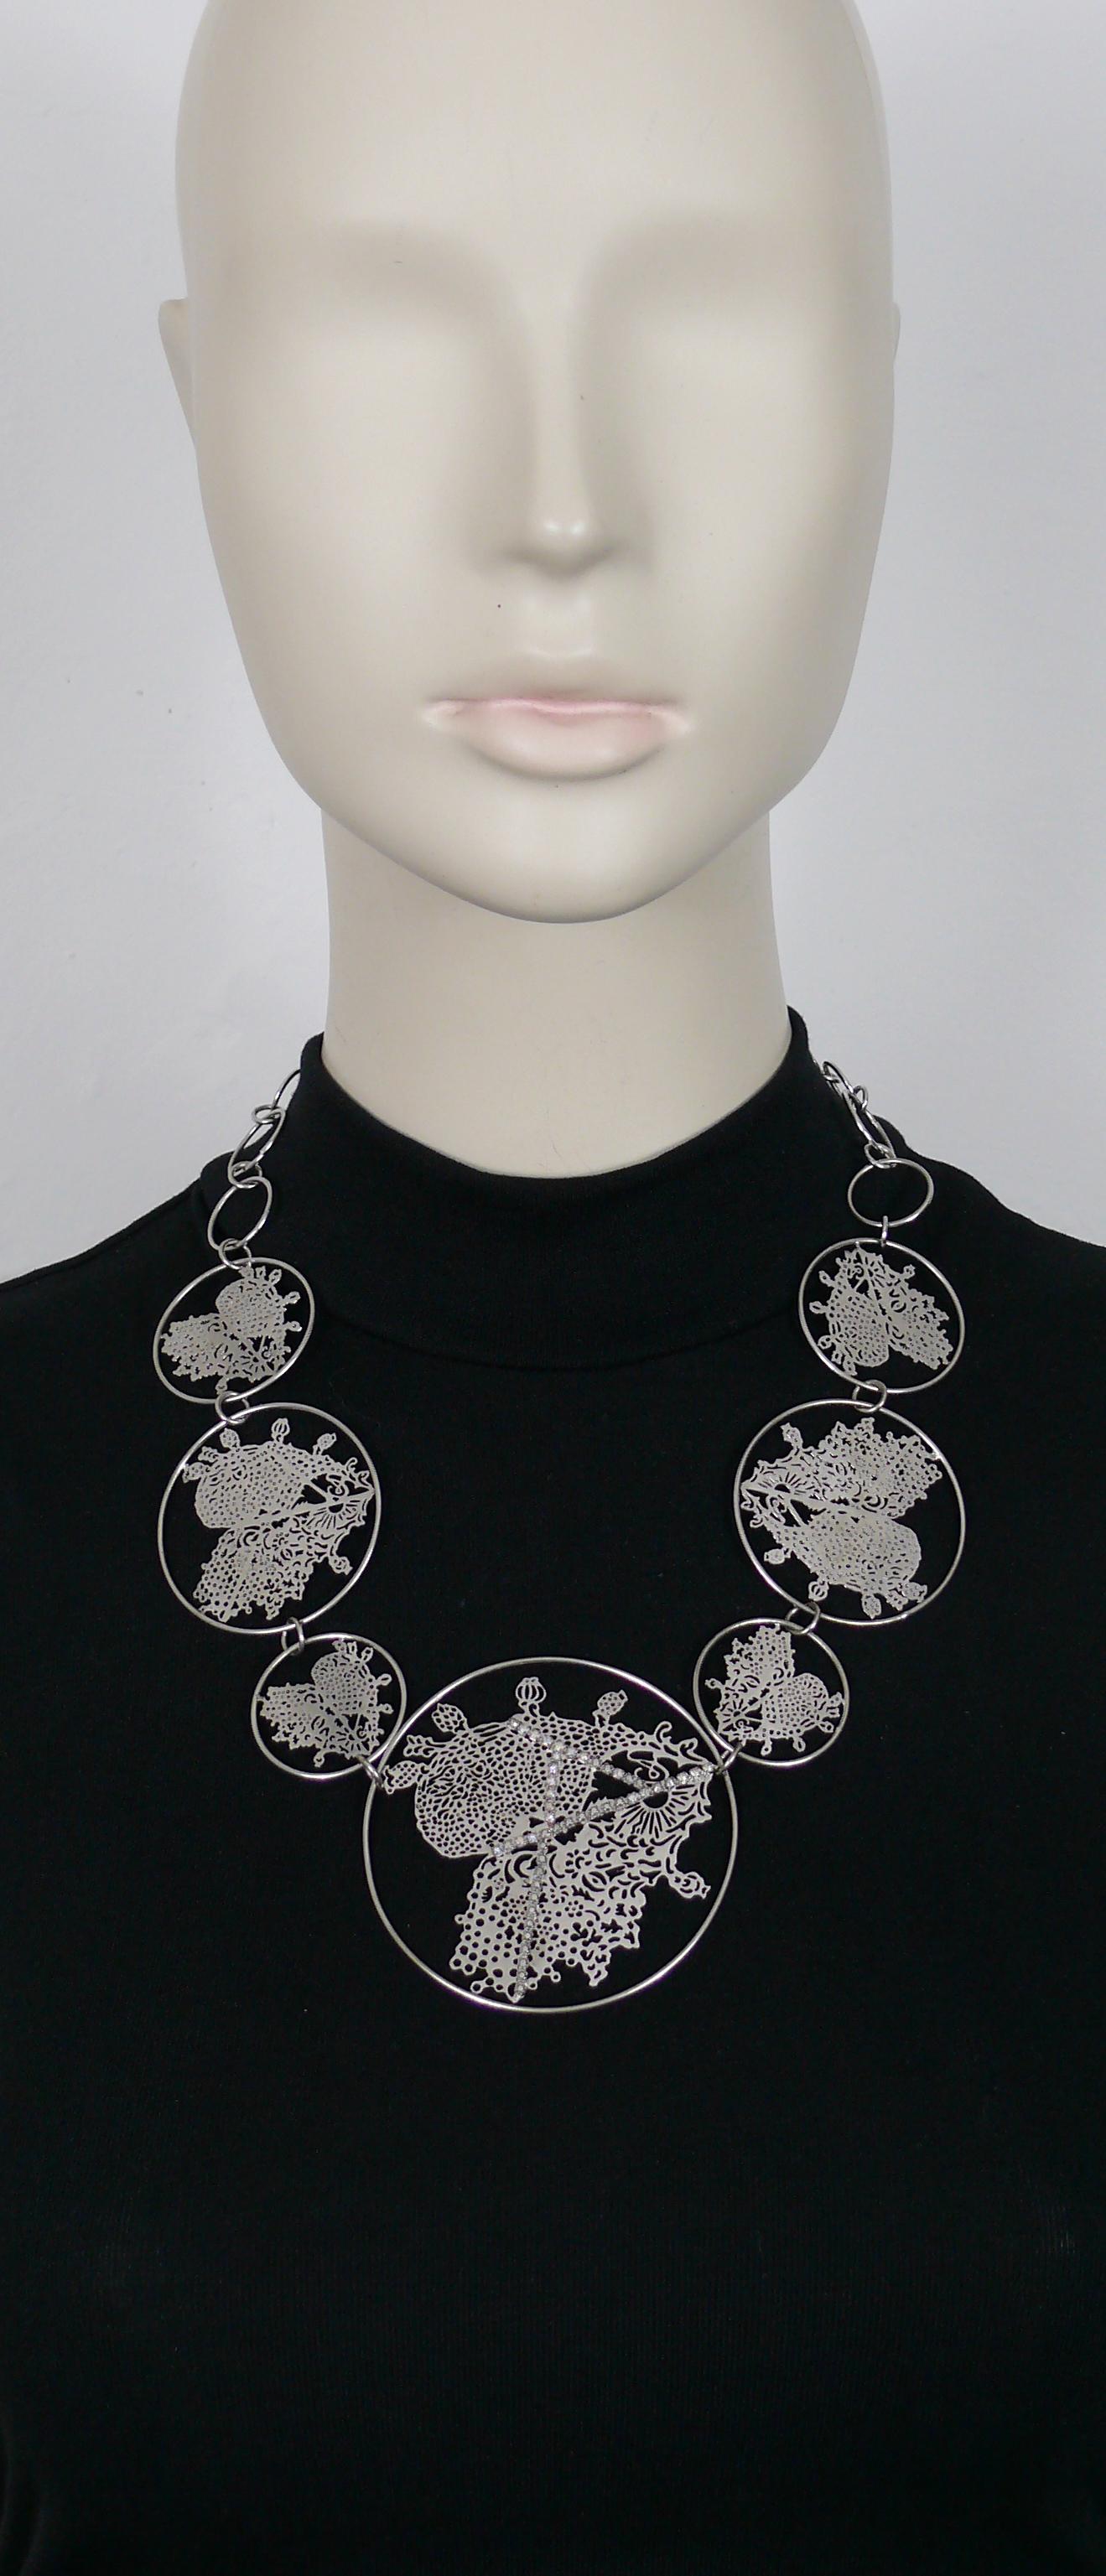 CHRISTIAN LACROIX vintage silver toned necklace featuring seven laser cut stylized heart medallions and crystal embellishement.

Silver tone metal hardware.

Monogram CL signature on each medallion (see example on the last picture).

T-bar